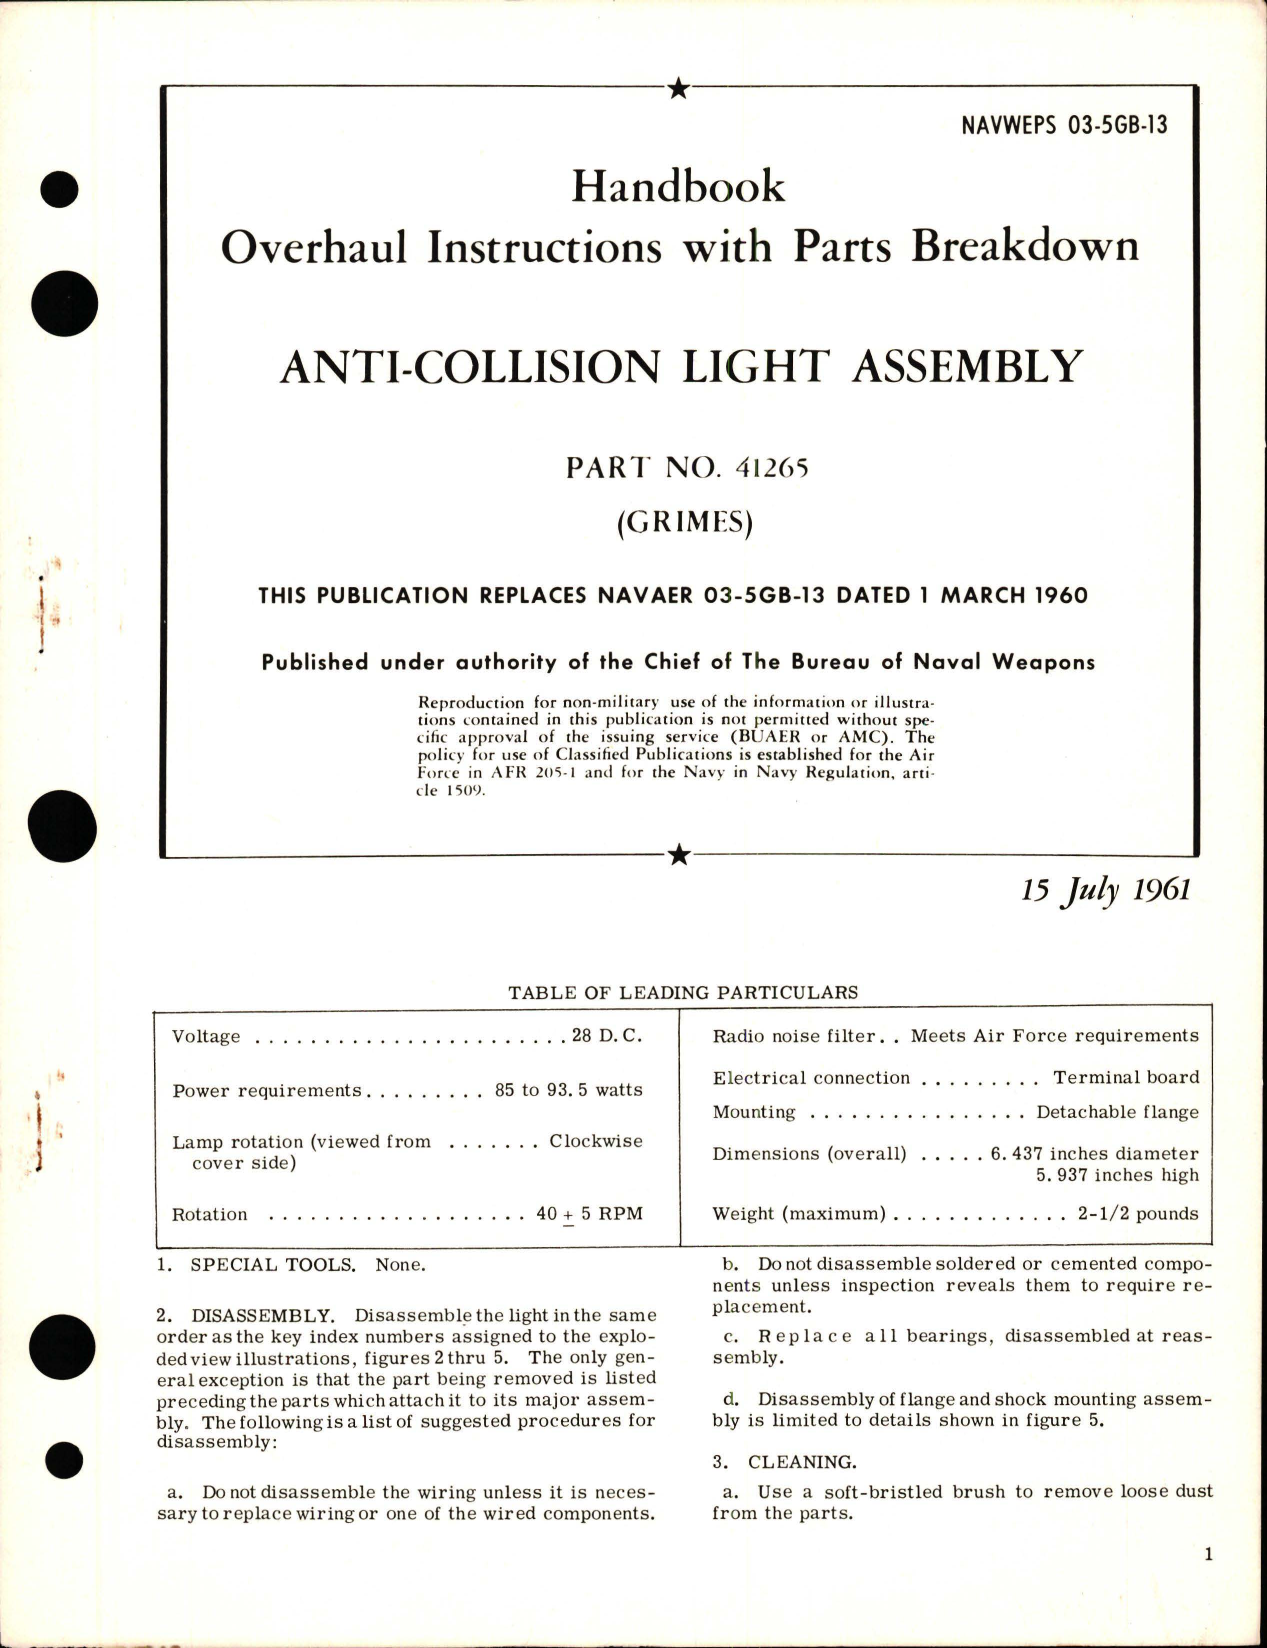 Sample page 1 from AirCorps Library document: Overhaul Instructions with Parts Breakdown for Anti-Collision Light Assembly - Part 41265 